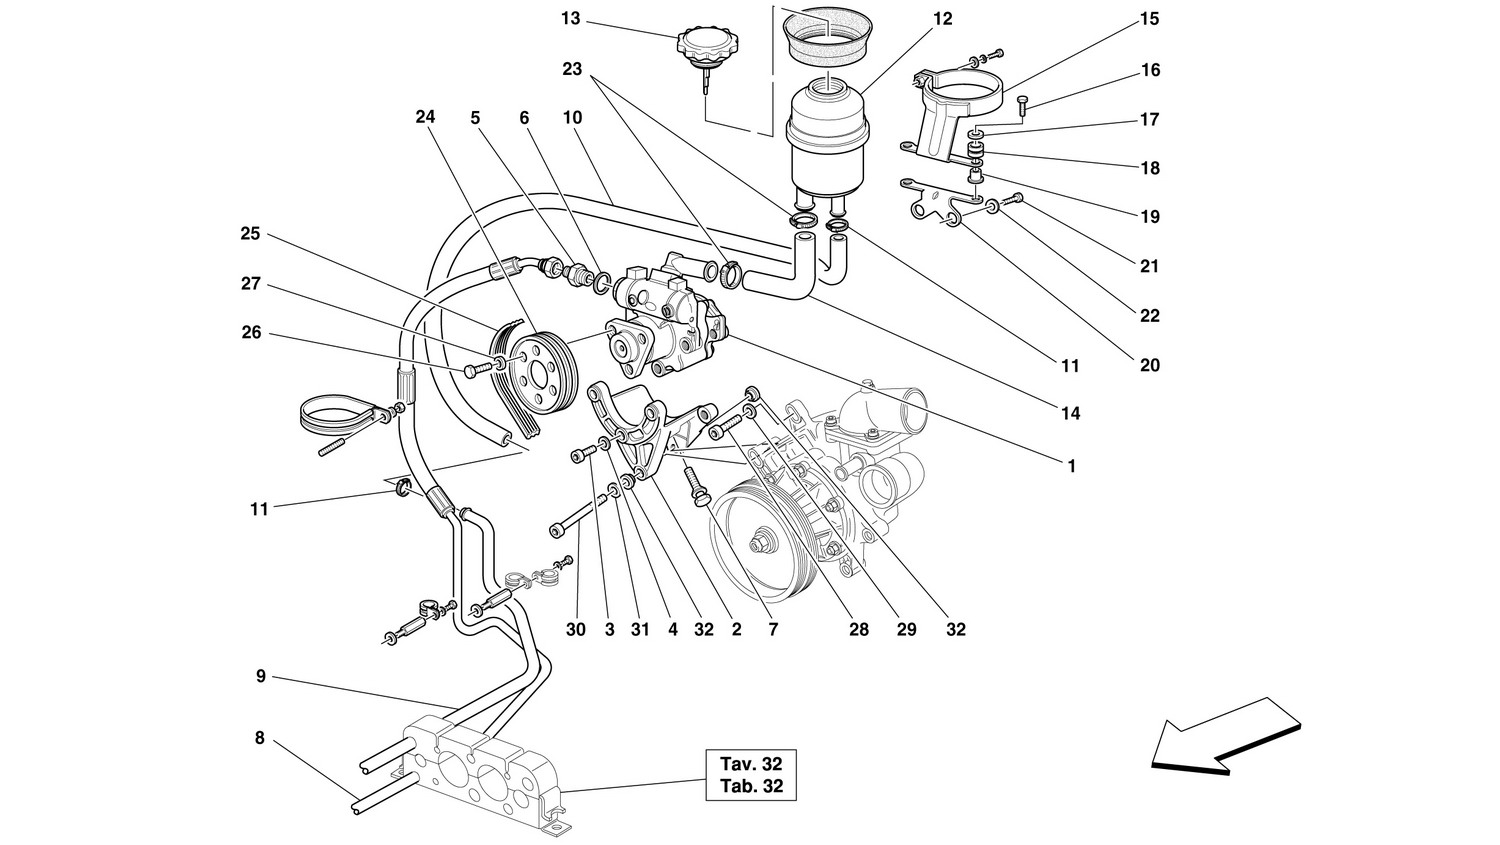 Schematic: Hydraulic Steering Pump And Tank